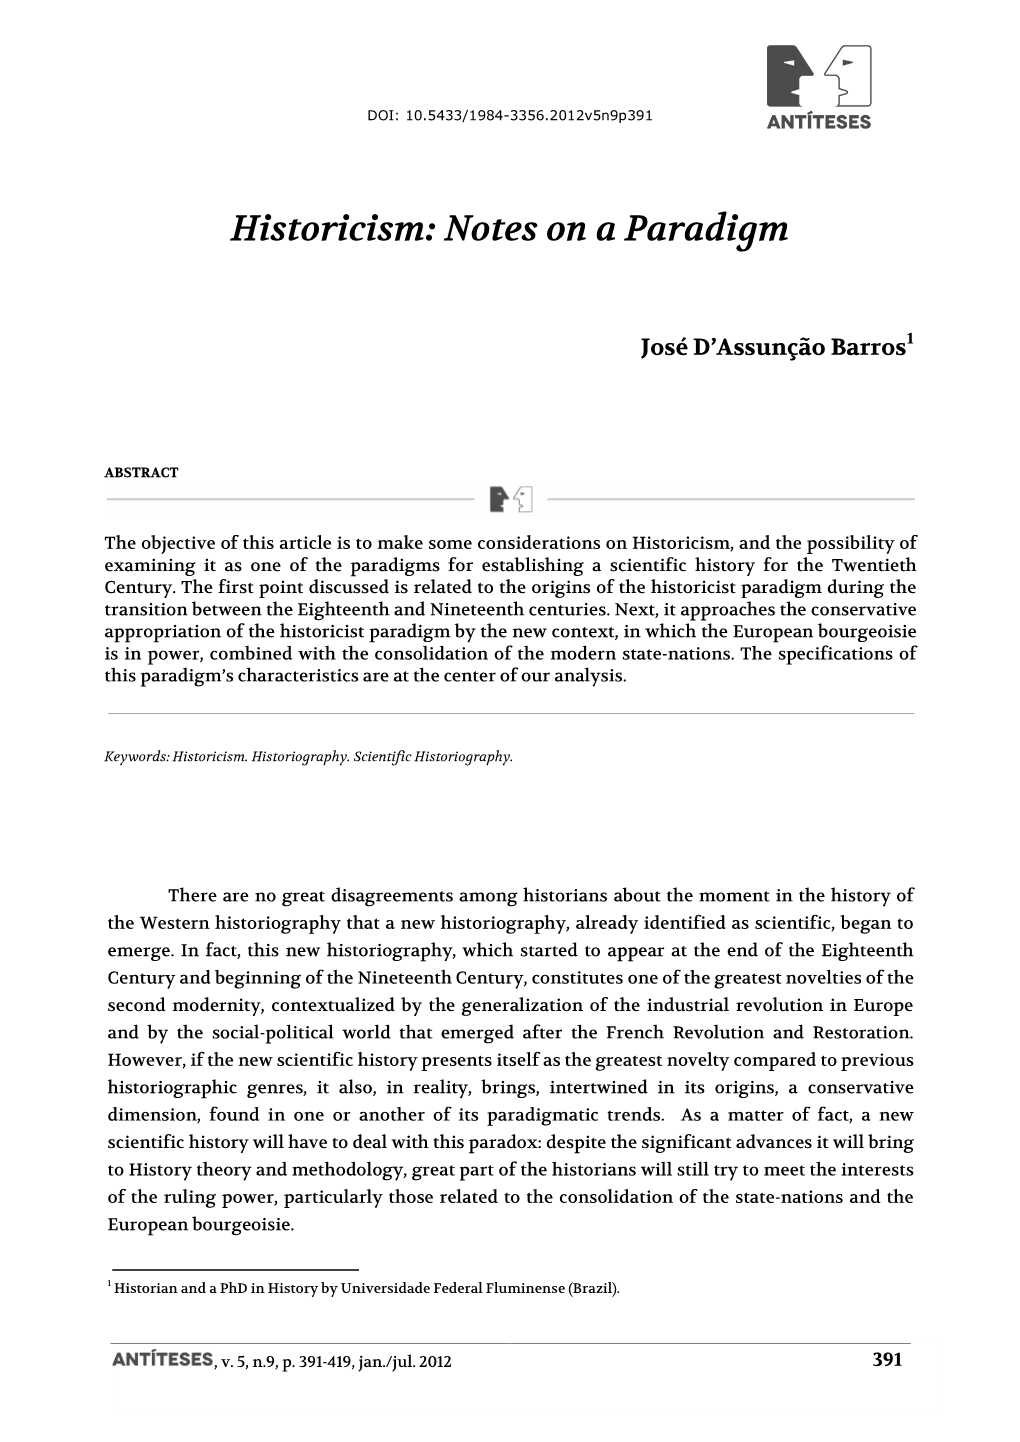 Historicism: Notes on a Paradigm